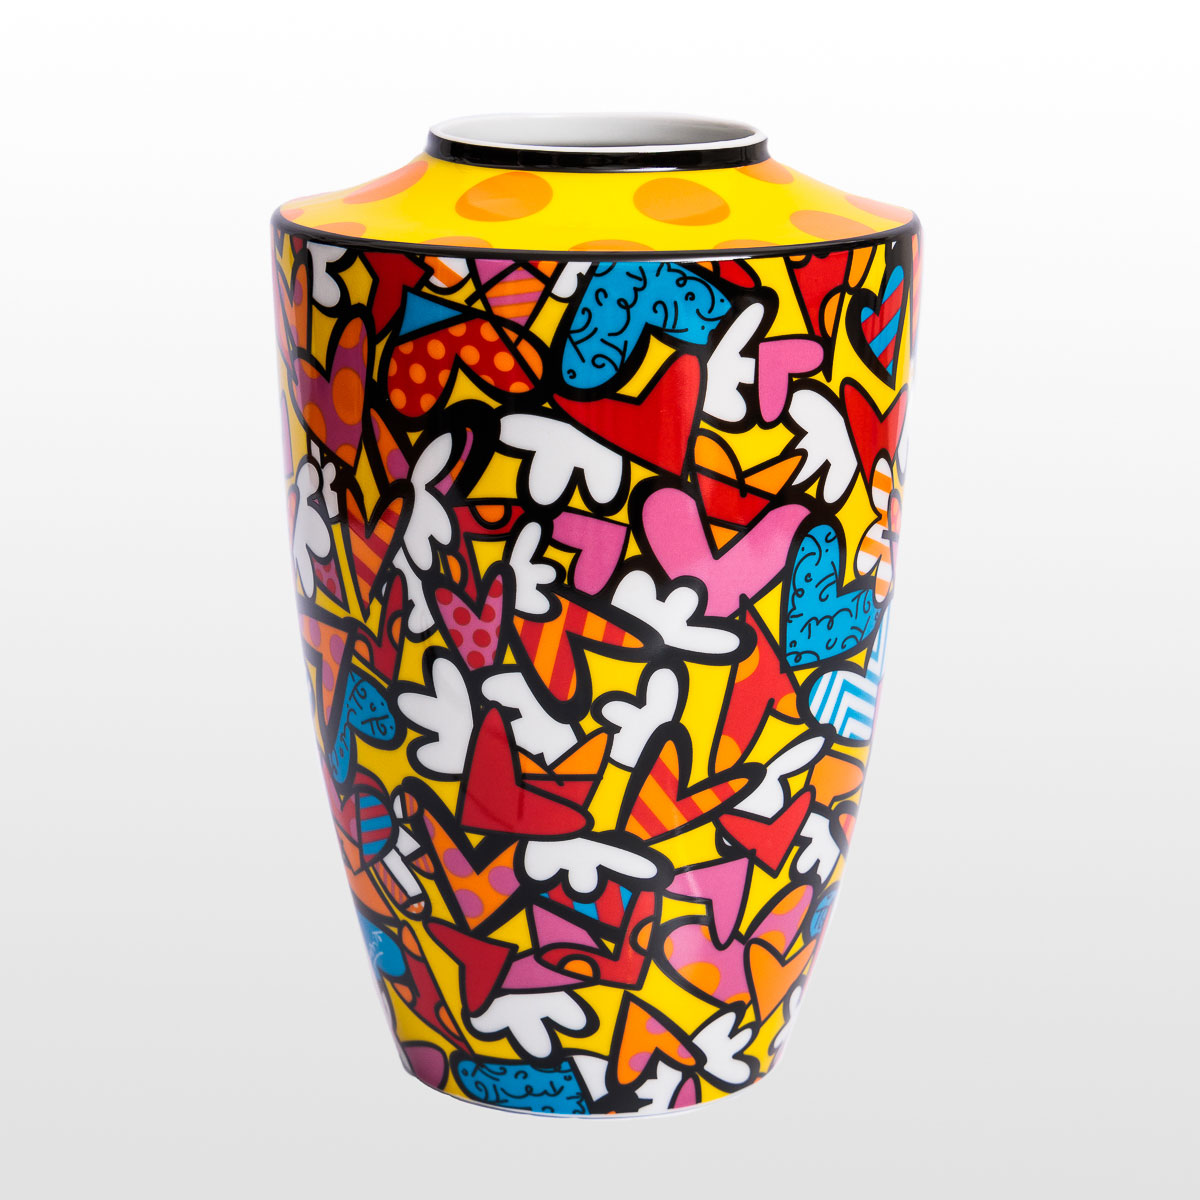 Romero Britto vase : All we need is love (detail 1)